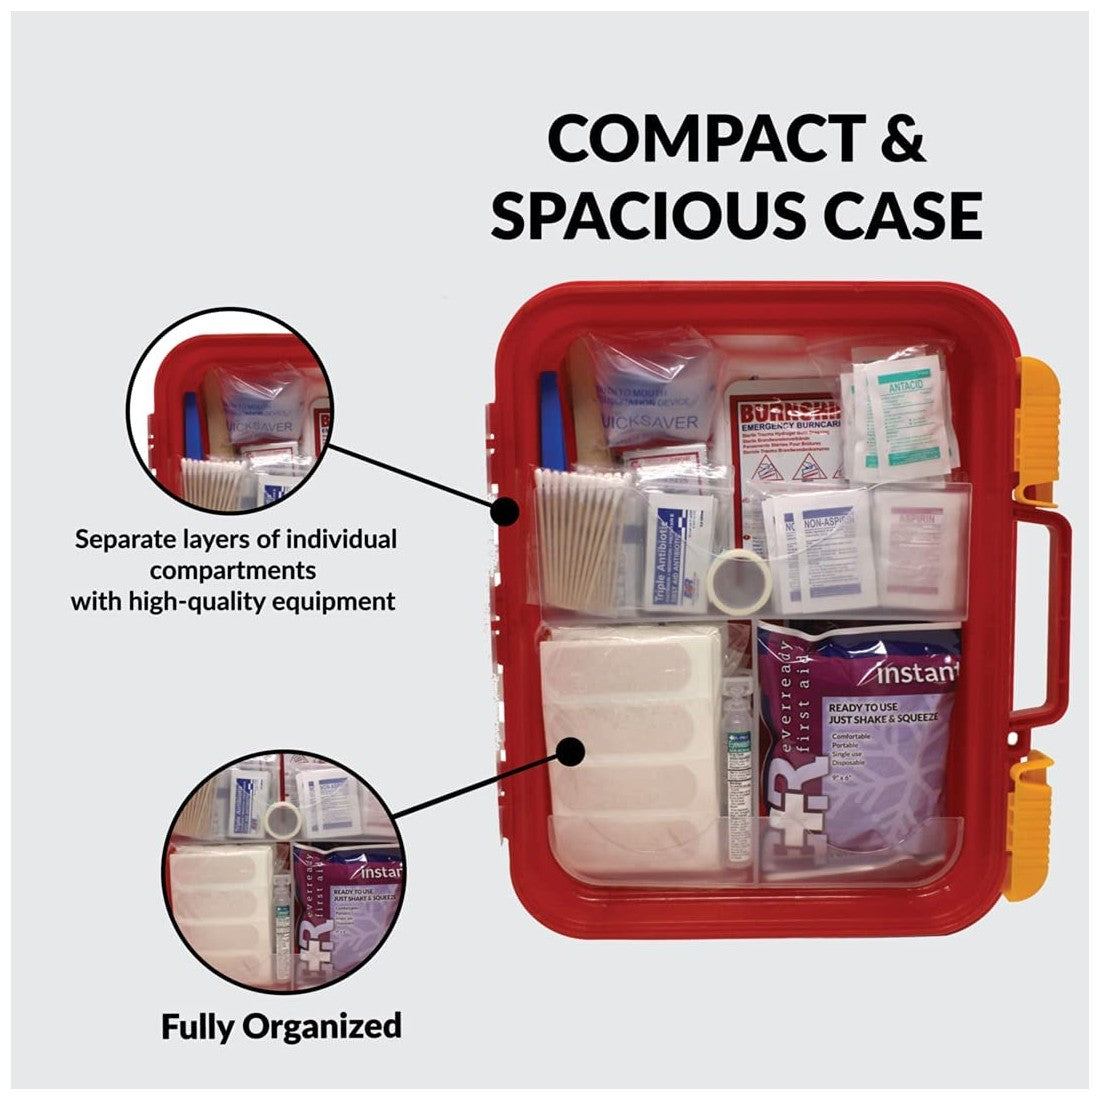 Ever Ready First Aid 100 Person OSHA/ANSI 354 Piece Hard Case First Aid Kit